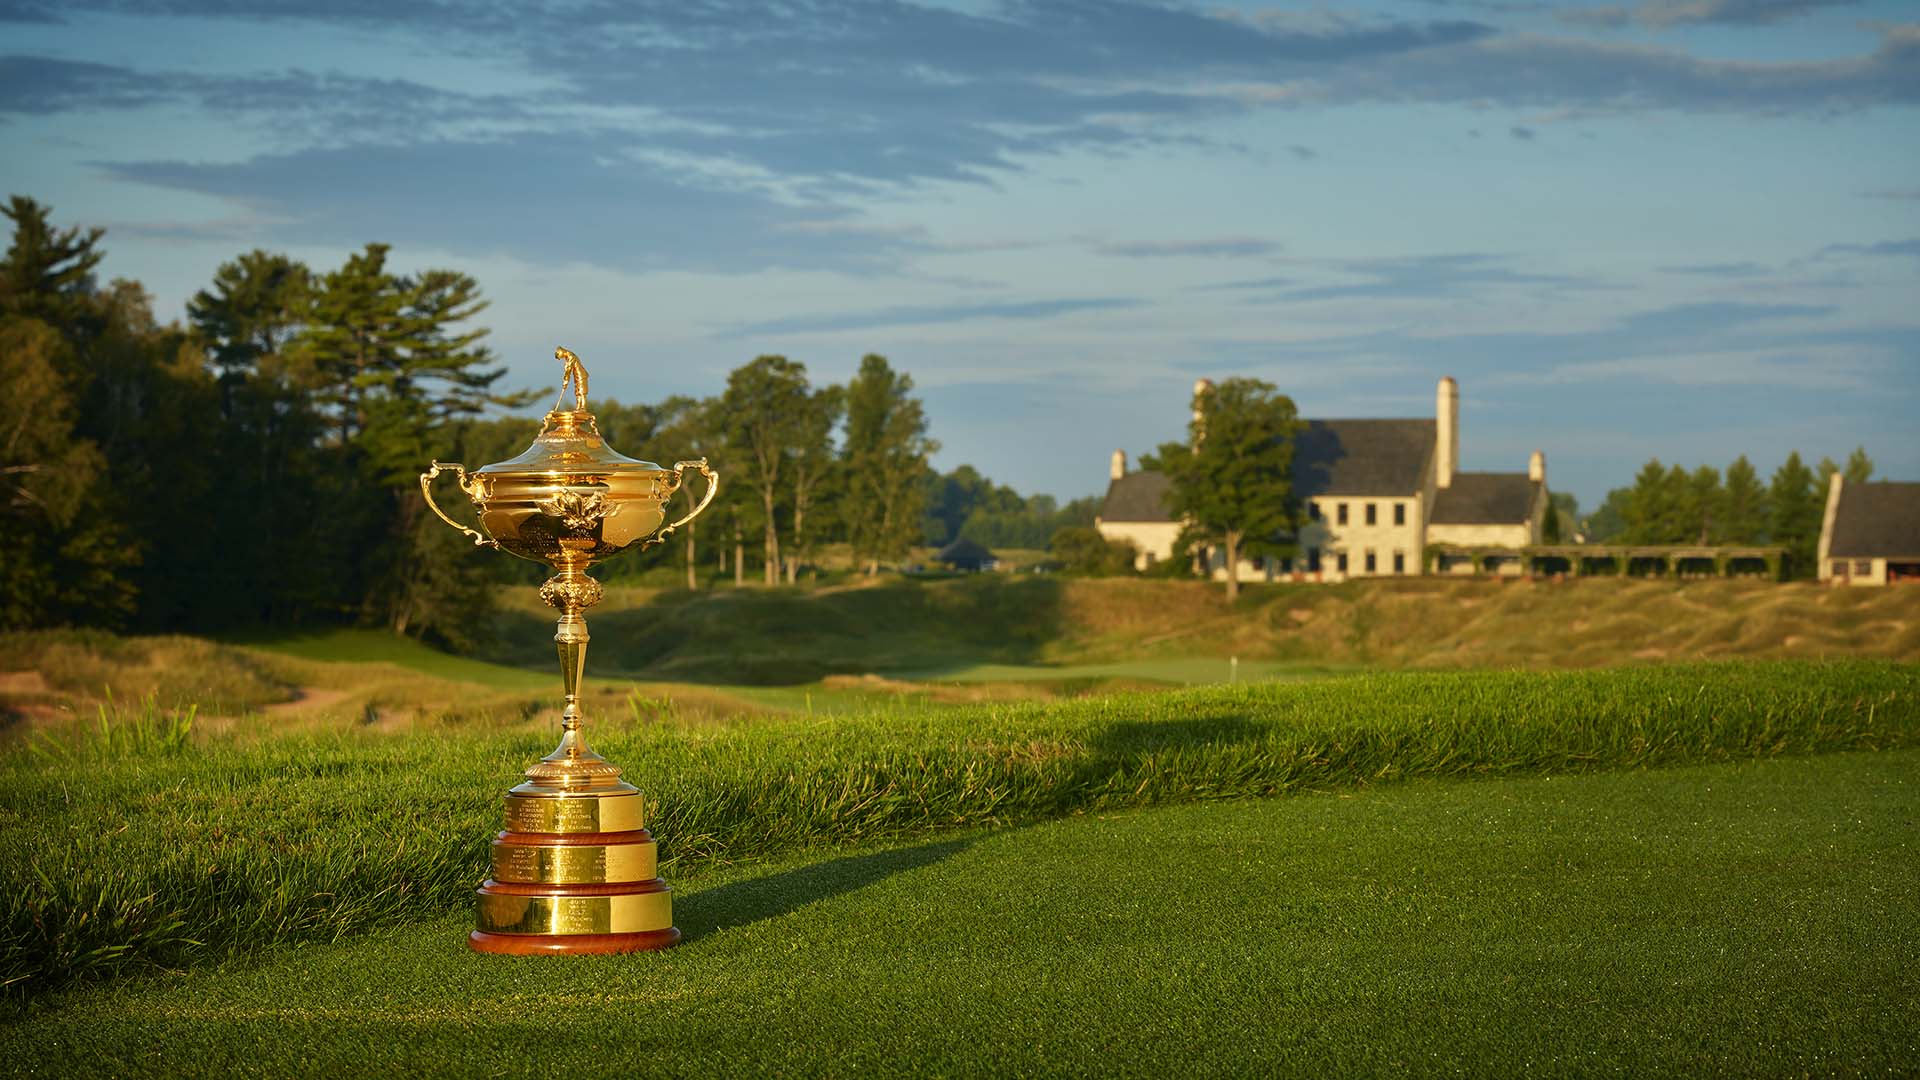 SHEBOYGAN, WISCONSIN - OCTOBER 15: A view of the Ryder Cup Trophy at Whistling Straits Golf Course on October 15, 2018 in Sheboygan, Wisconsin. (Photo by Gary Kellner/PGA of America via Getty Images)